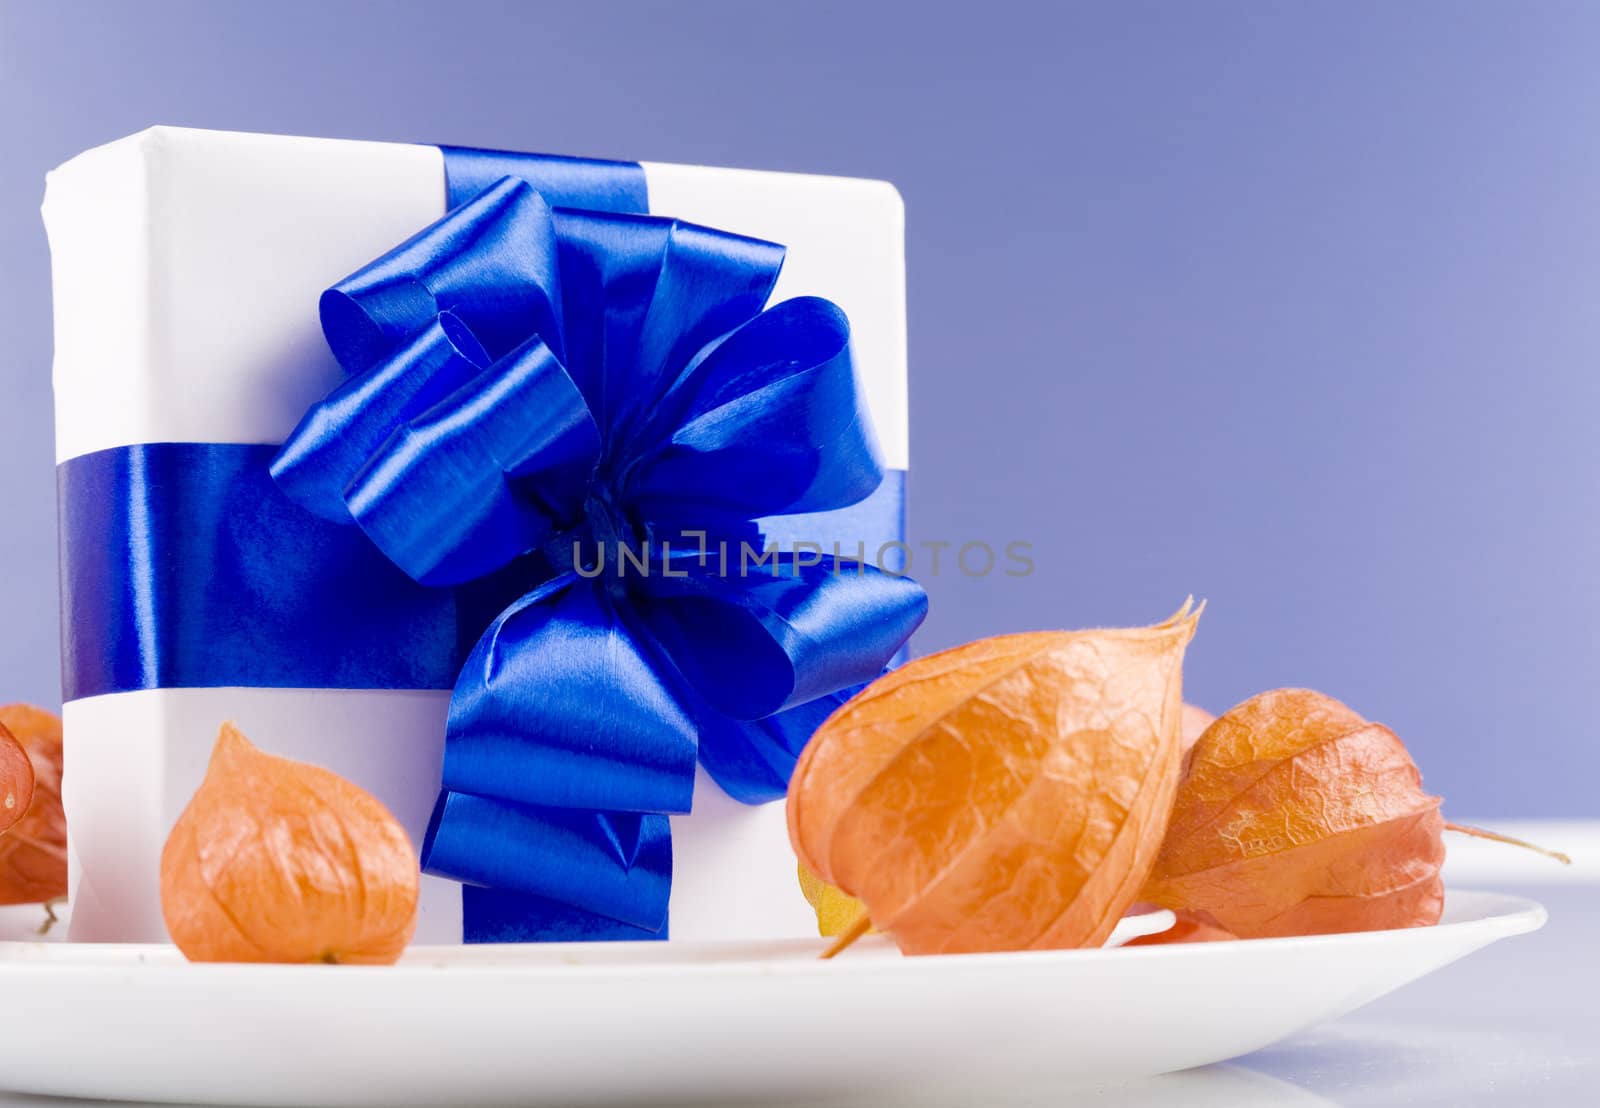 White present with blue ribbons as table decorations